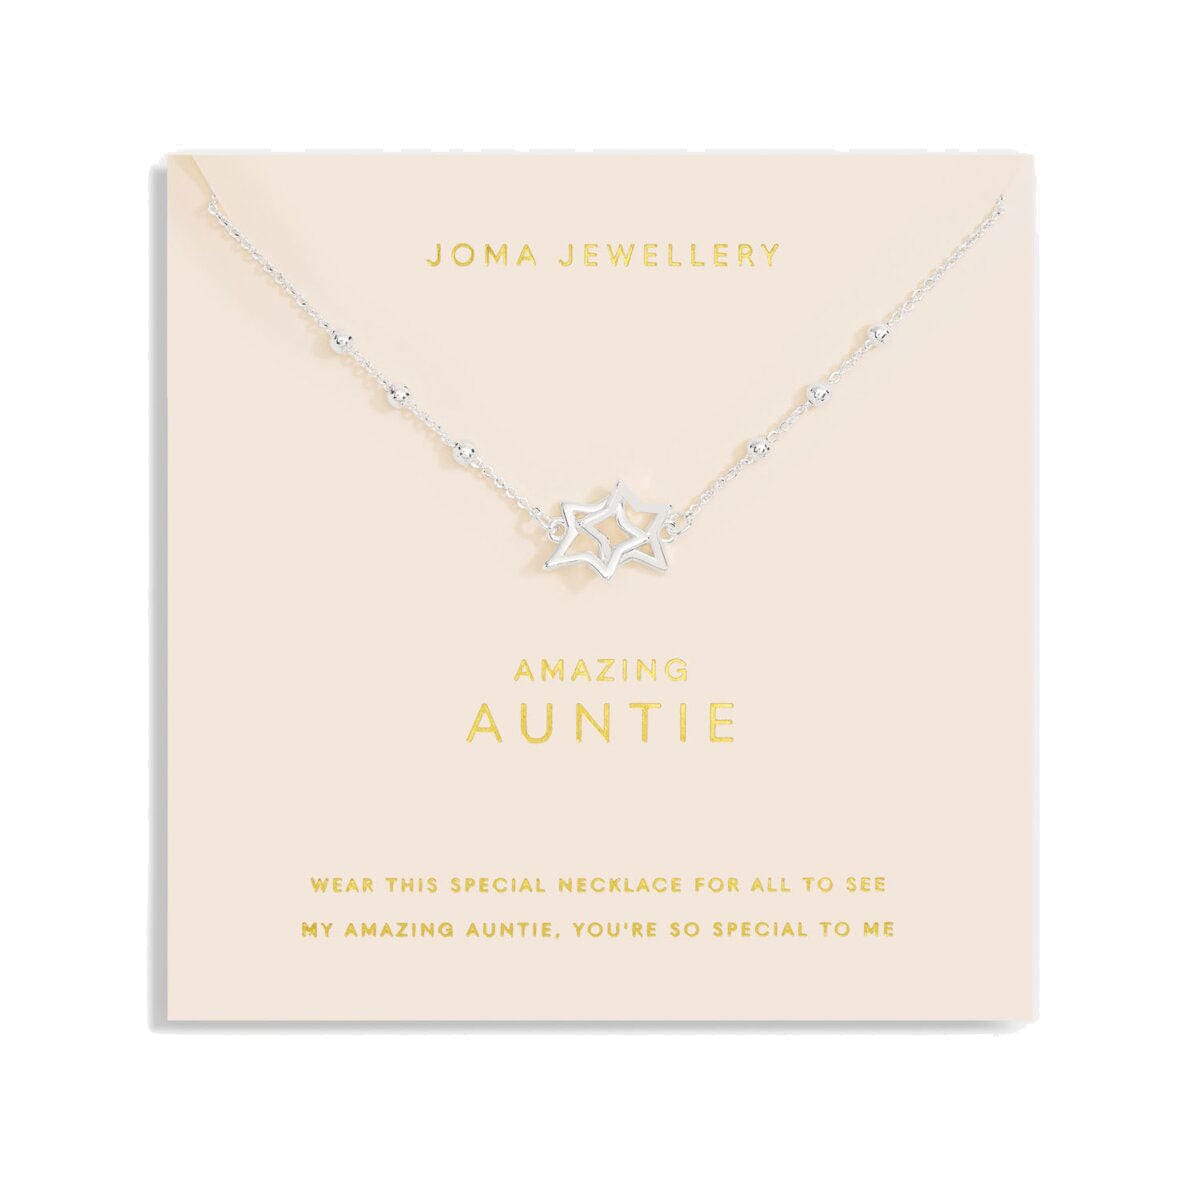 Joma Jewellery Necklace Joma Jewellery Forever Yours Necklace - Amazing Auntie